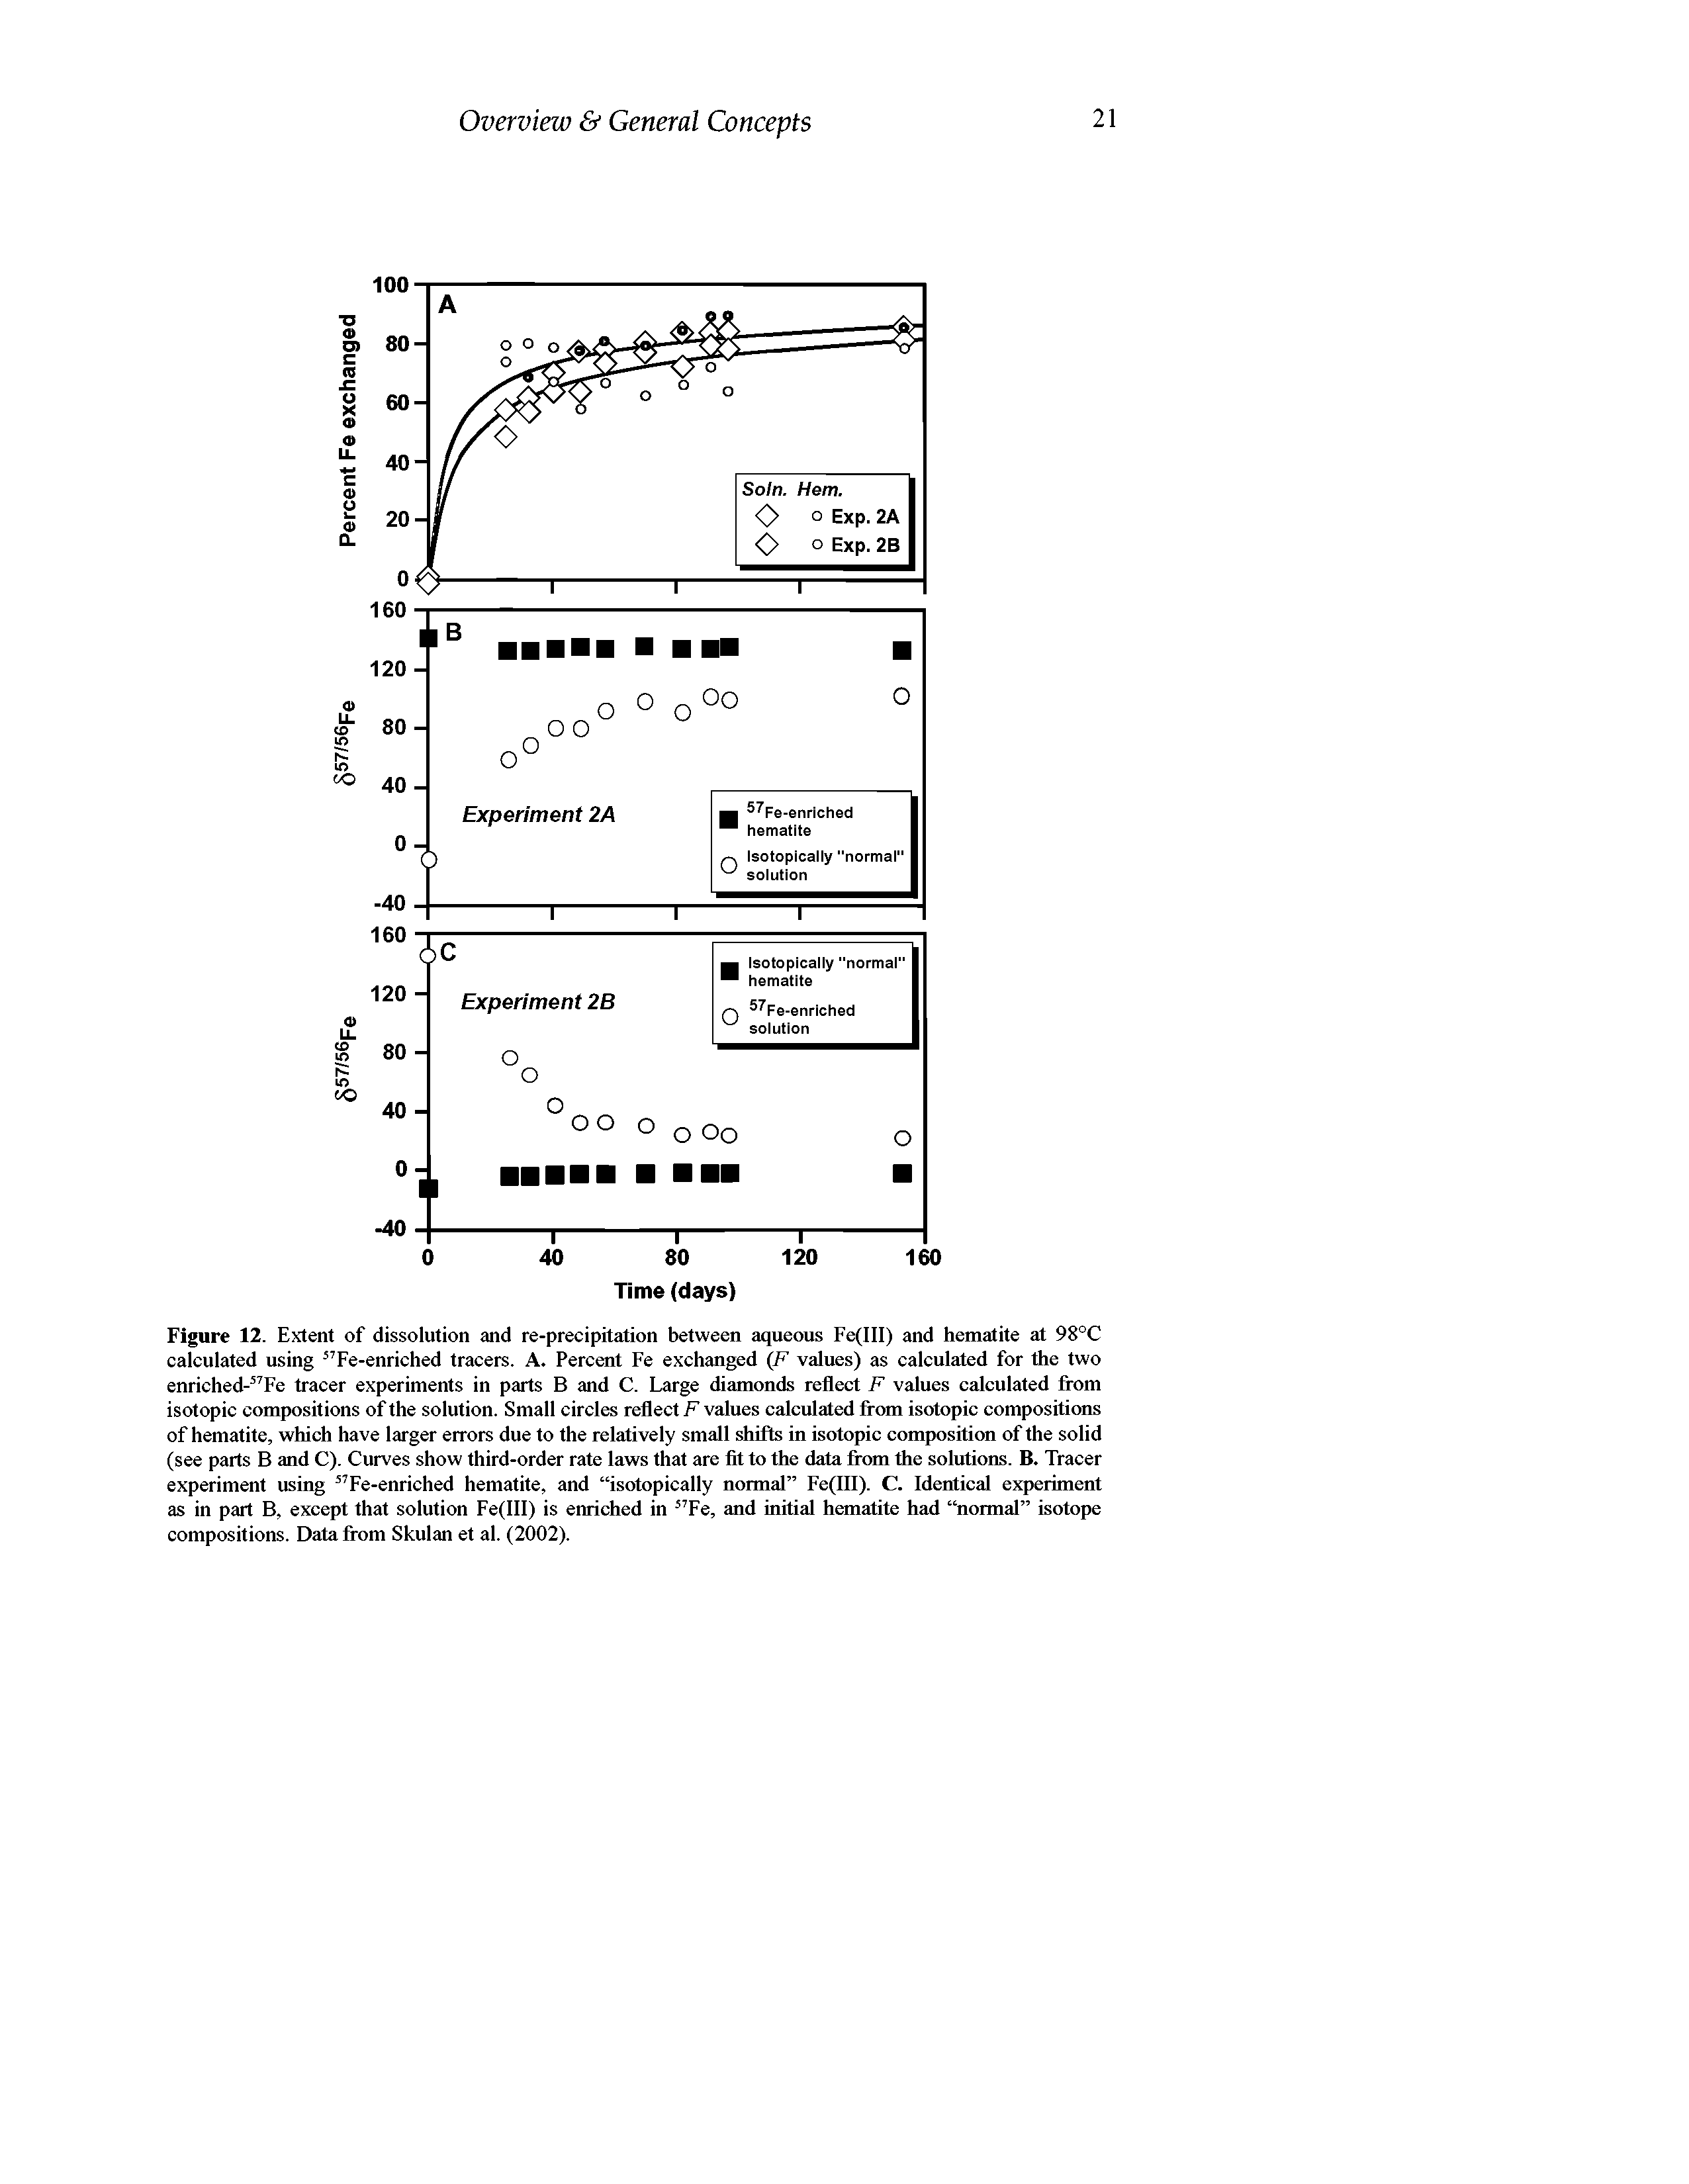 Figure 12. Extent of dissolution and re-precipitation between aqueous Fe(III) and hematite at 98°C calculated using Fe-enriched tracers. A. Percent Fe exchanged (F values) as calculated for the two enriched- Fe tracer experiments in parts B and C. Large diamonds reflect F values calculated from isotopic compositions of the solution. Small circles reflect F values calculated from isotopic compositions of hematite, which have larger errors due to the relatively small shifts in isotopic composition of the solid (see parts B and C). Curves show third-order rate laws that are fit to the data from the solutions. B. Tracer experiment using Fe-enriched hematite, and isotopically normal Fe(lll). C. Identical experiment as in part B, except that solution Fe(lll) is enriched in Te, and initial hematite had normal isotope compositions. Data from Skulan et al. (2002).